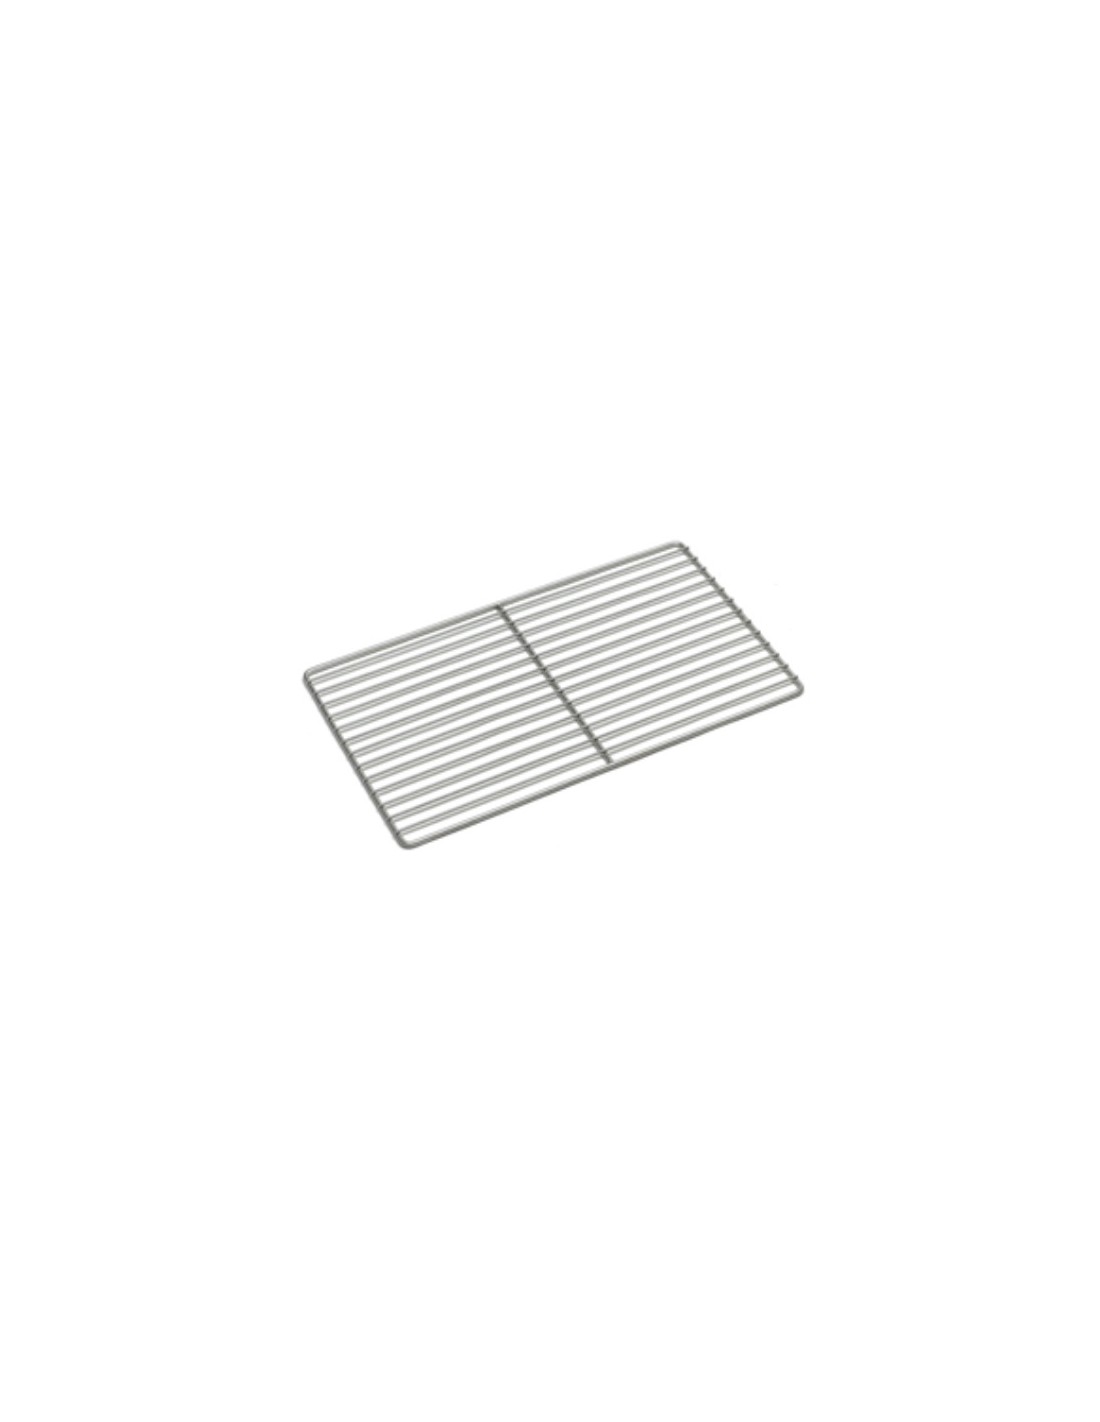 Stainless steel grill 1/1 GN